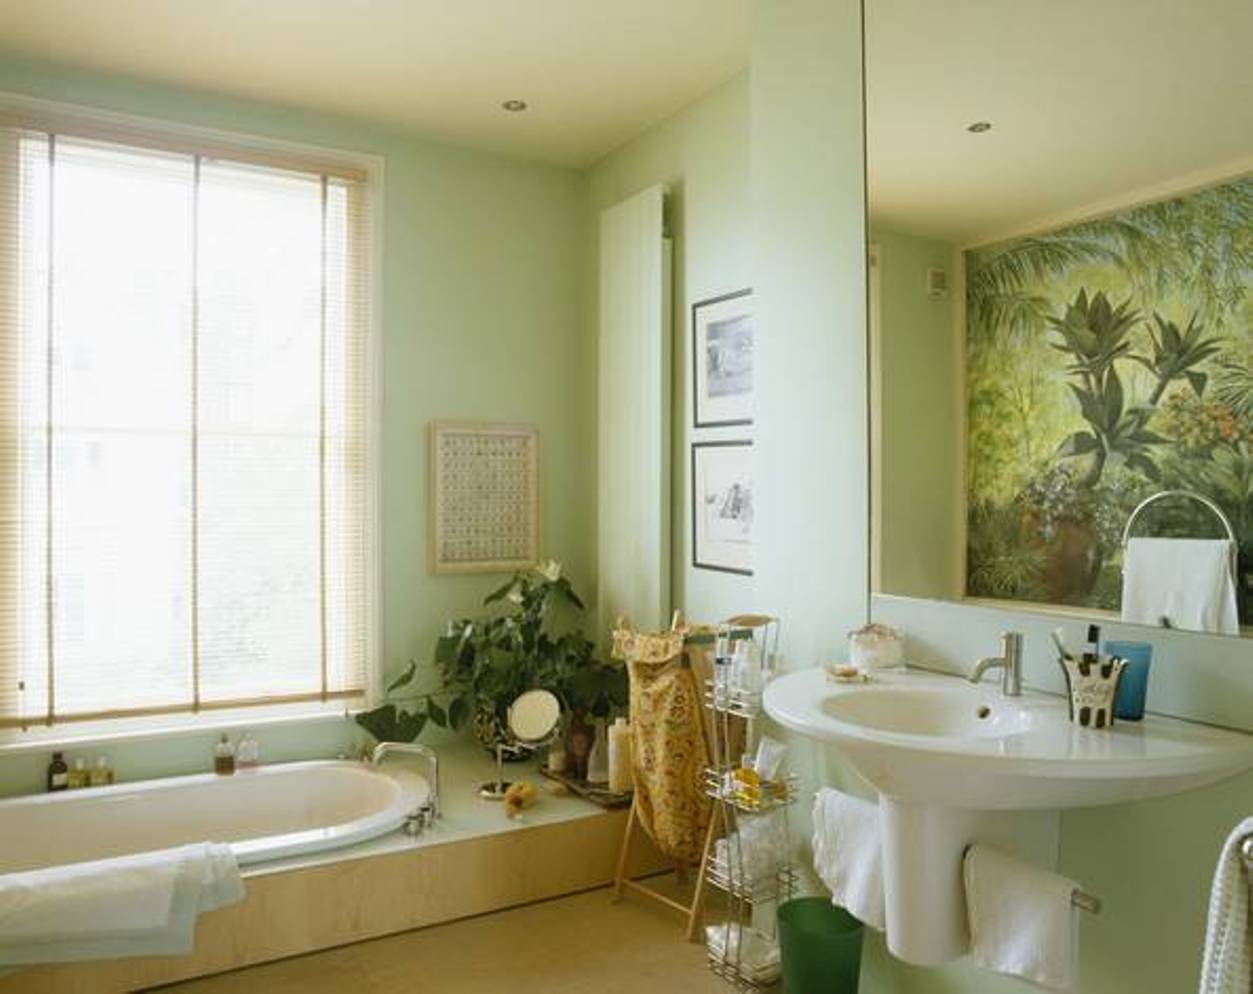 Bathroom Tropical Bathroom Theme Tropical Bathroom Theme With Mint 1253x994